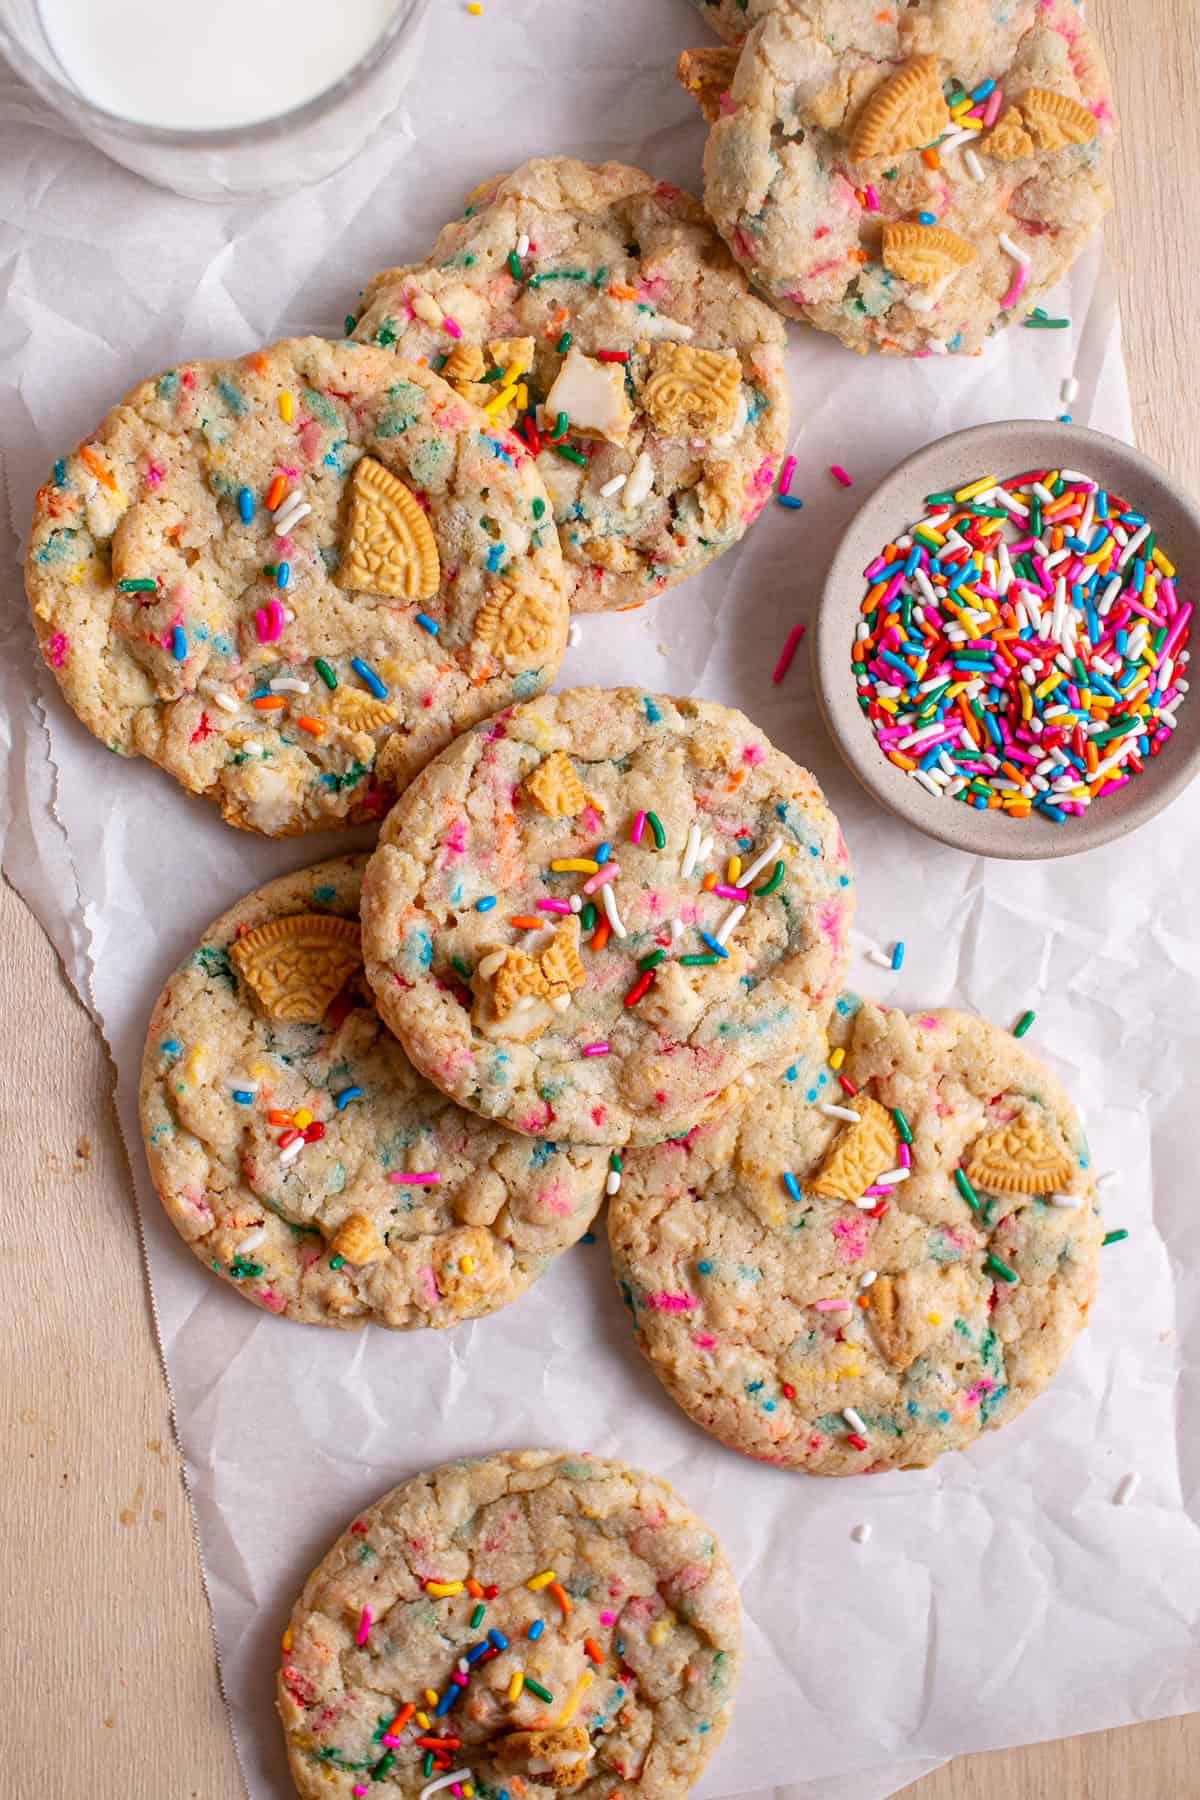 Golden Funfetti Cookies stacked on top of each other by a glass of milk.